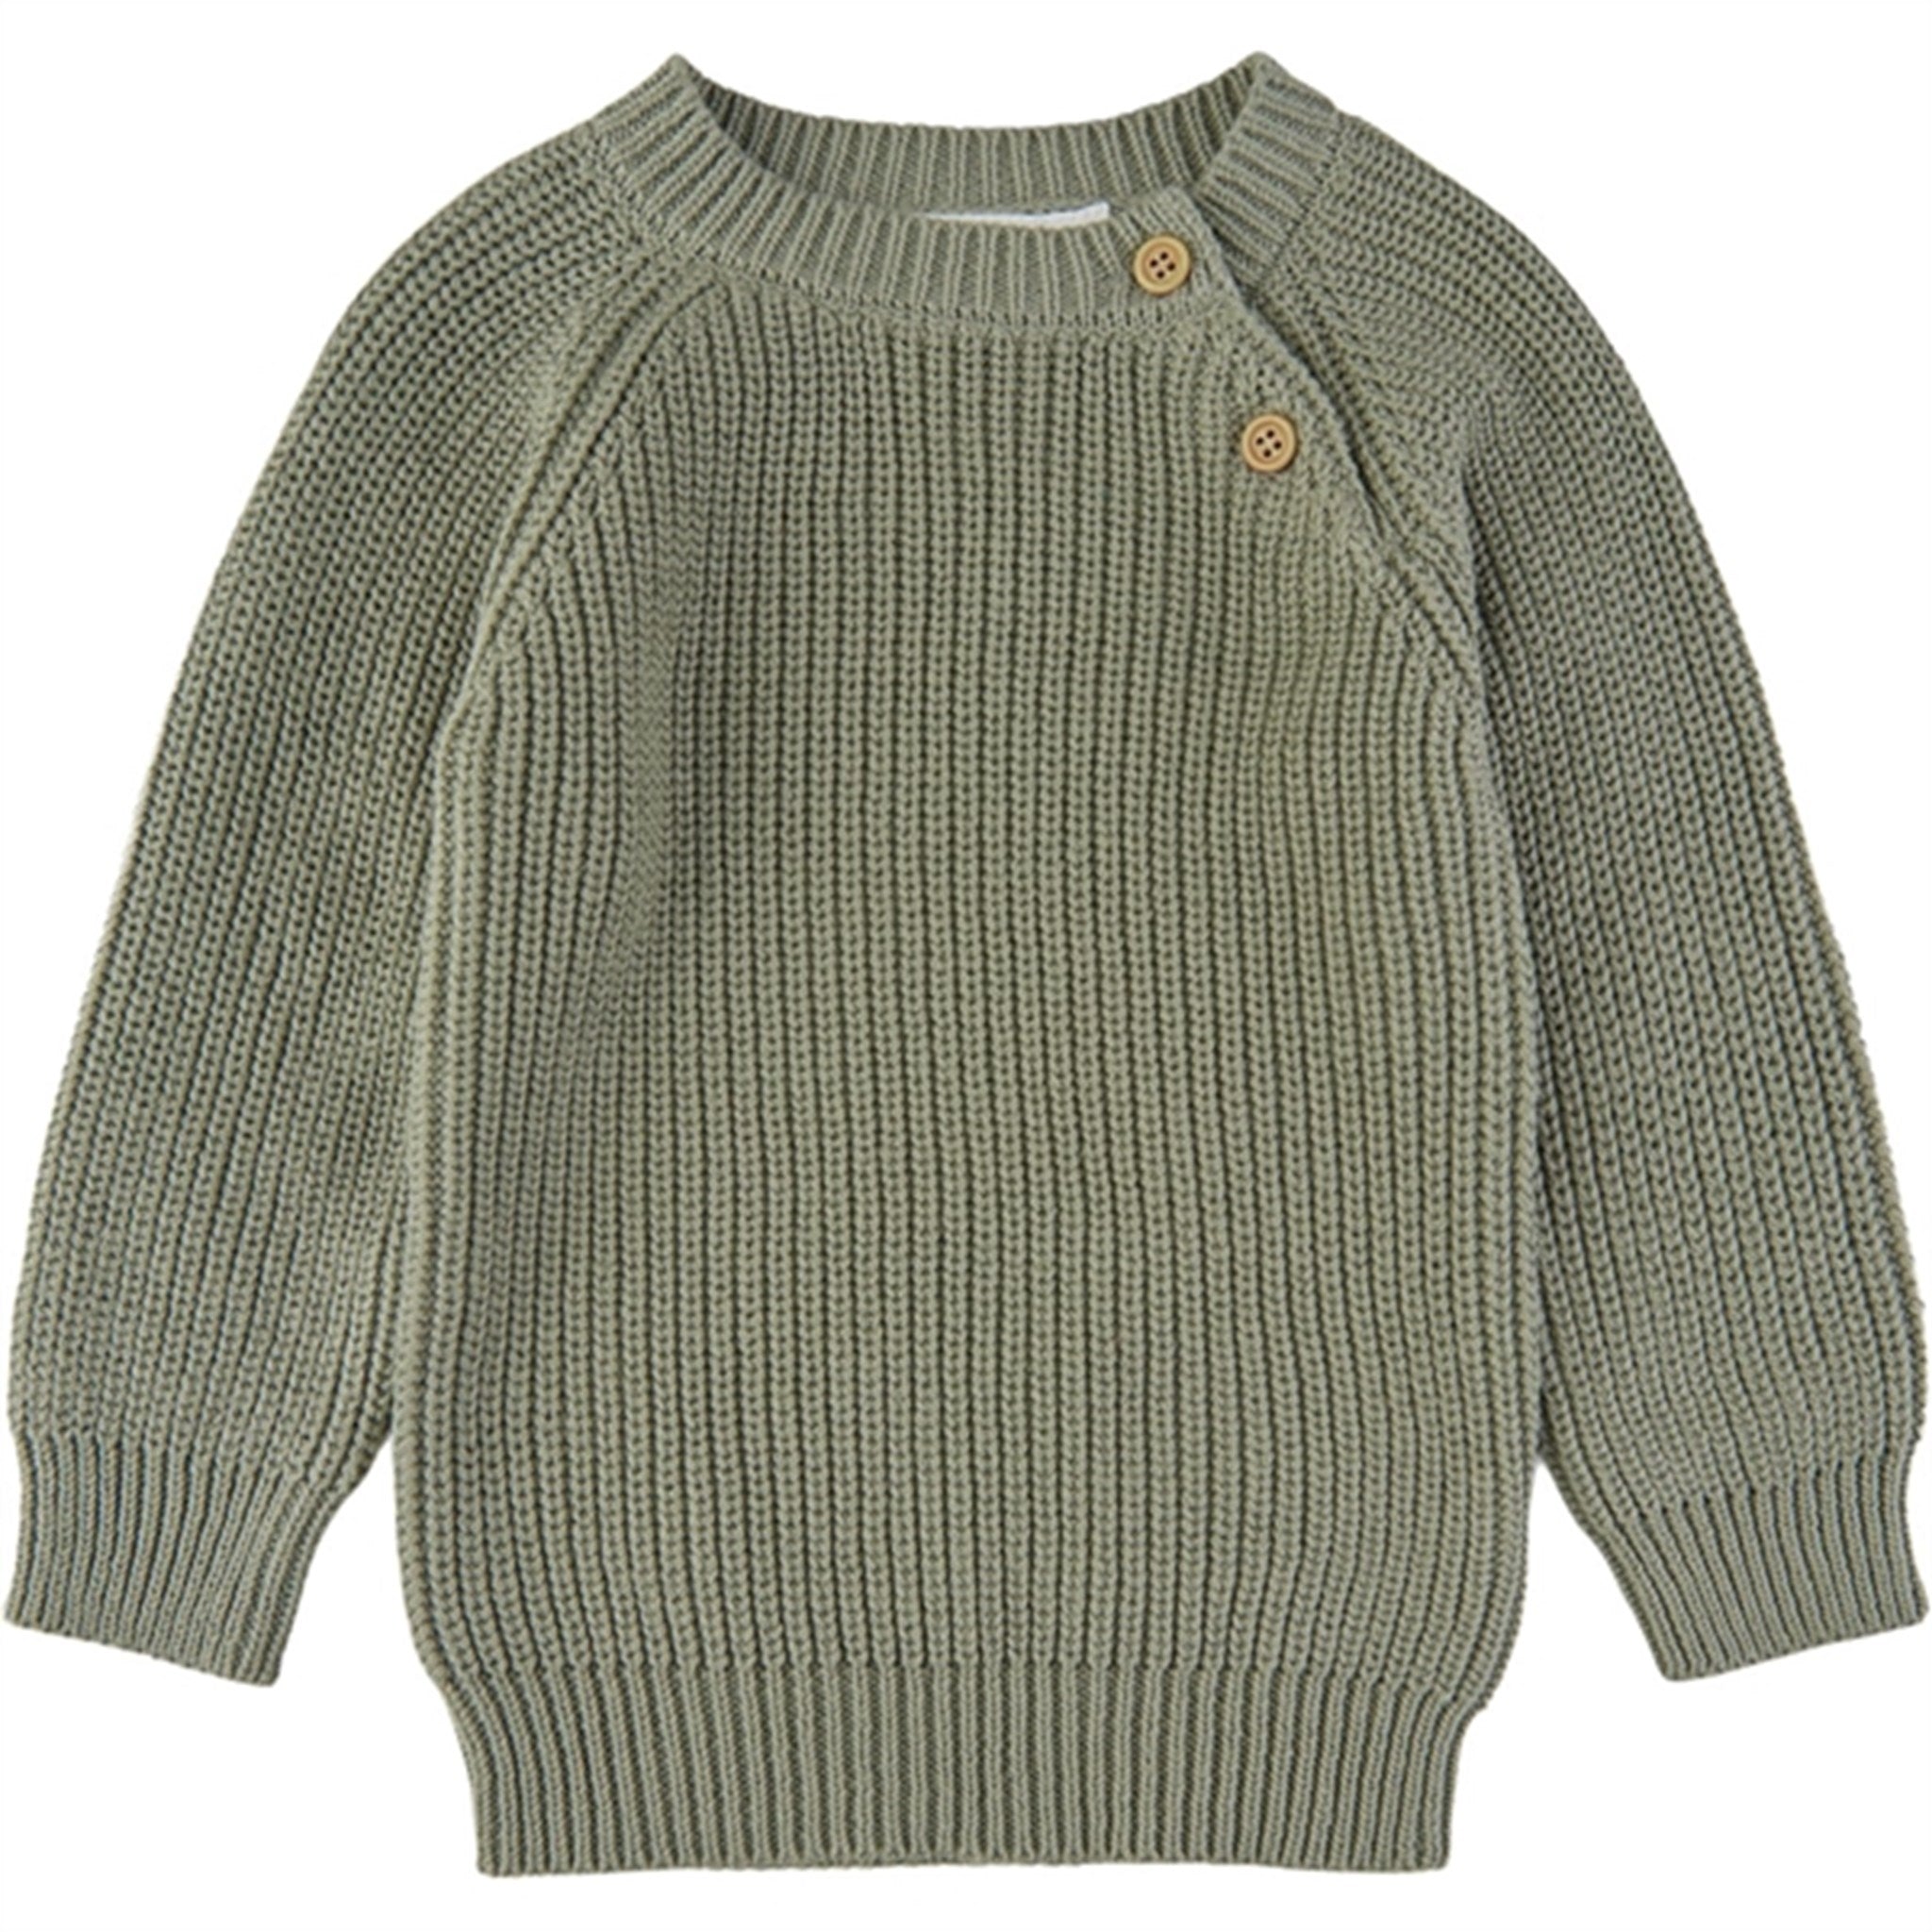 THE NEW Siblings Seagrass Elfred Pullover